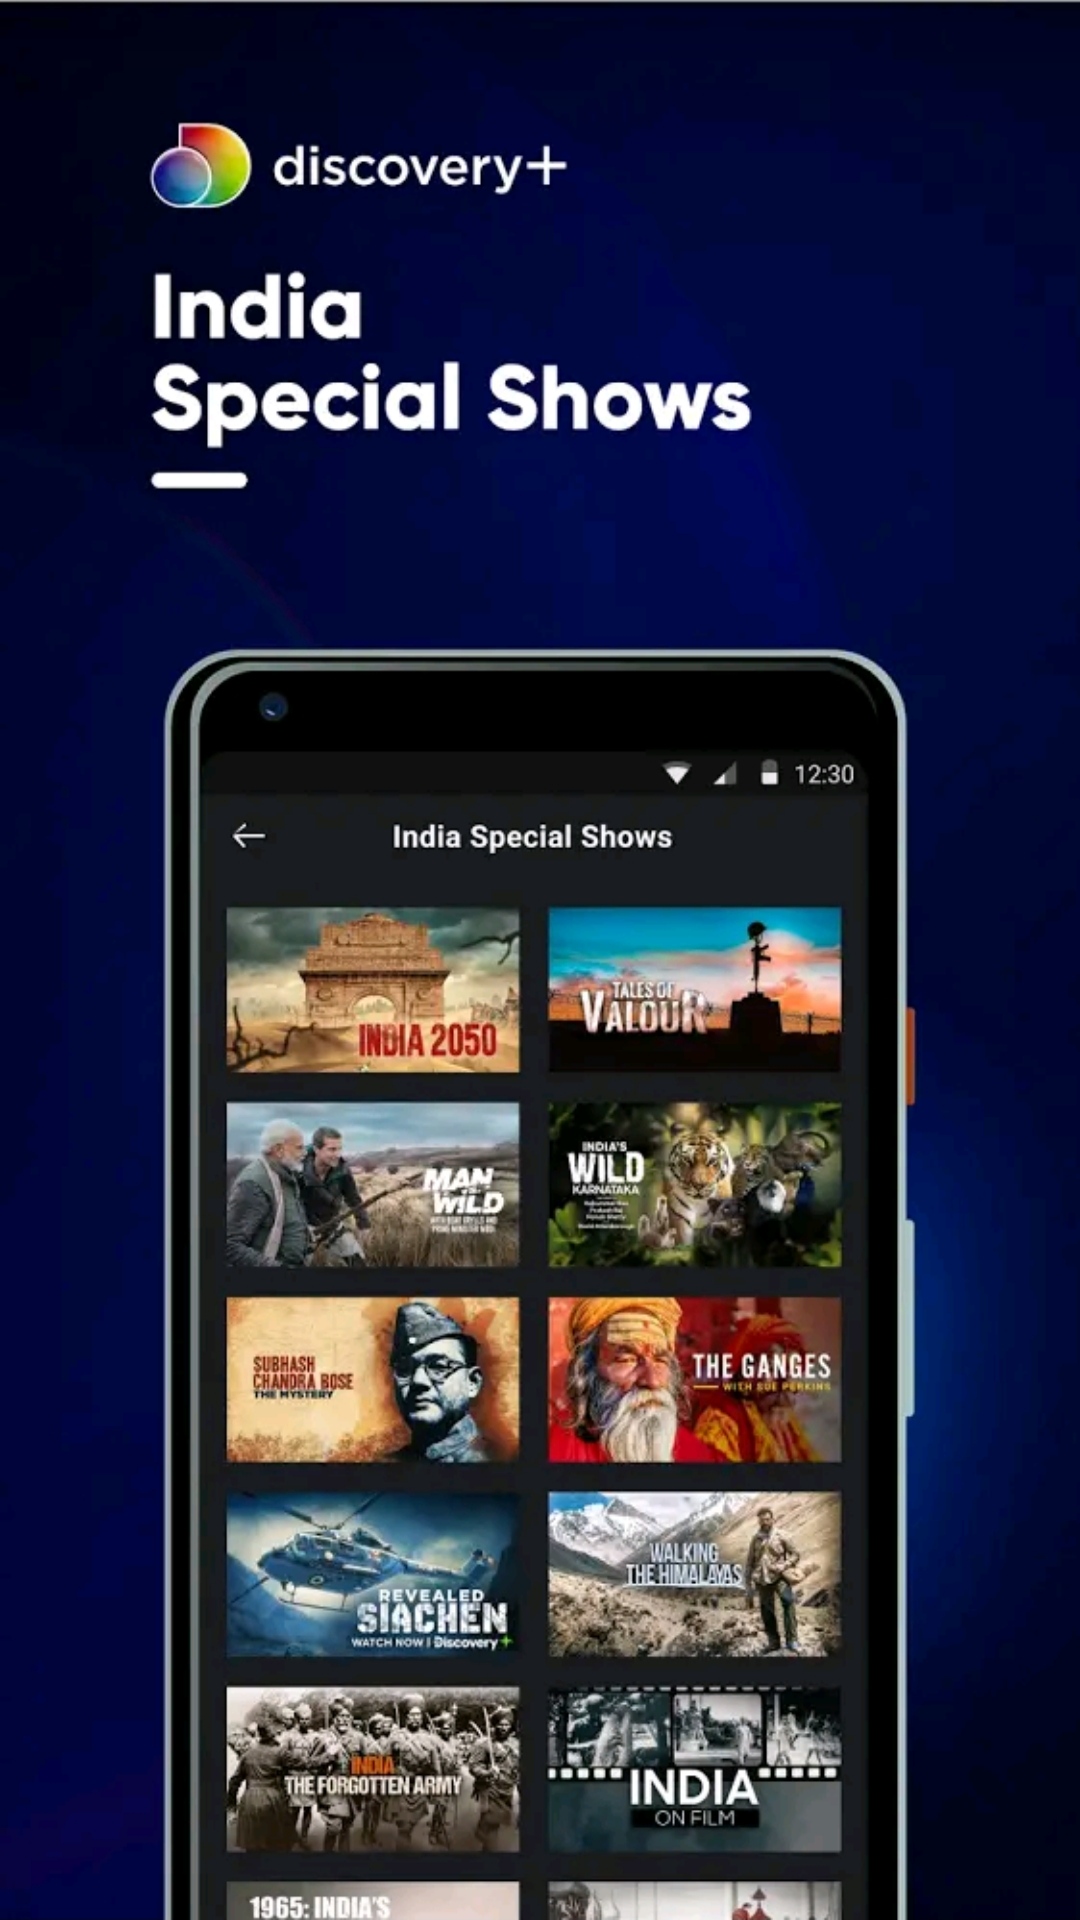 Discovery+ Video Streaming App